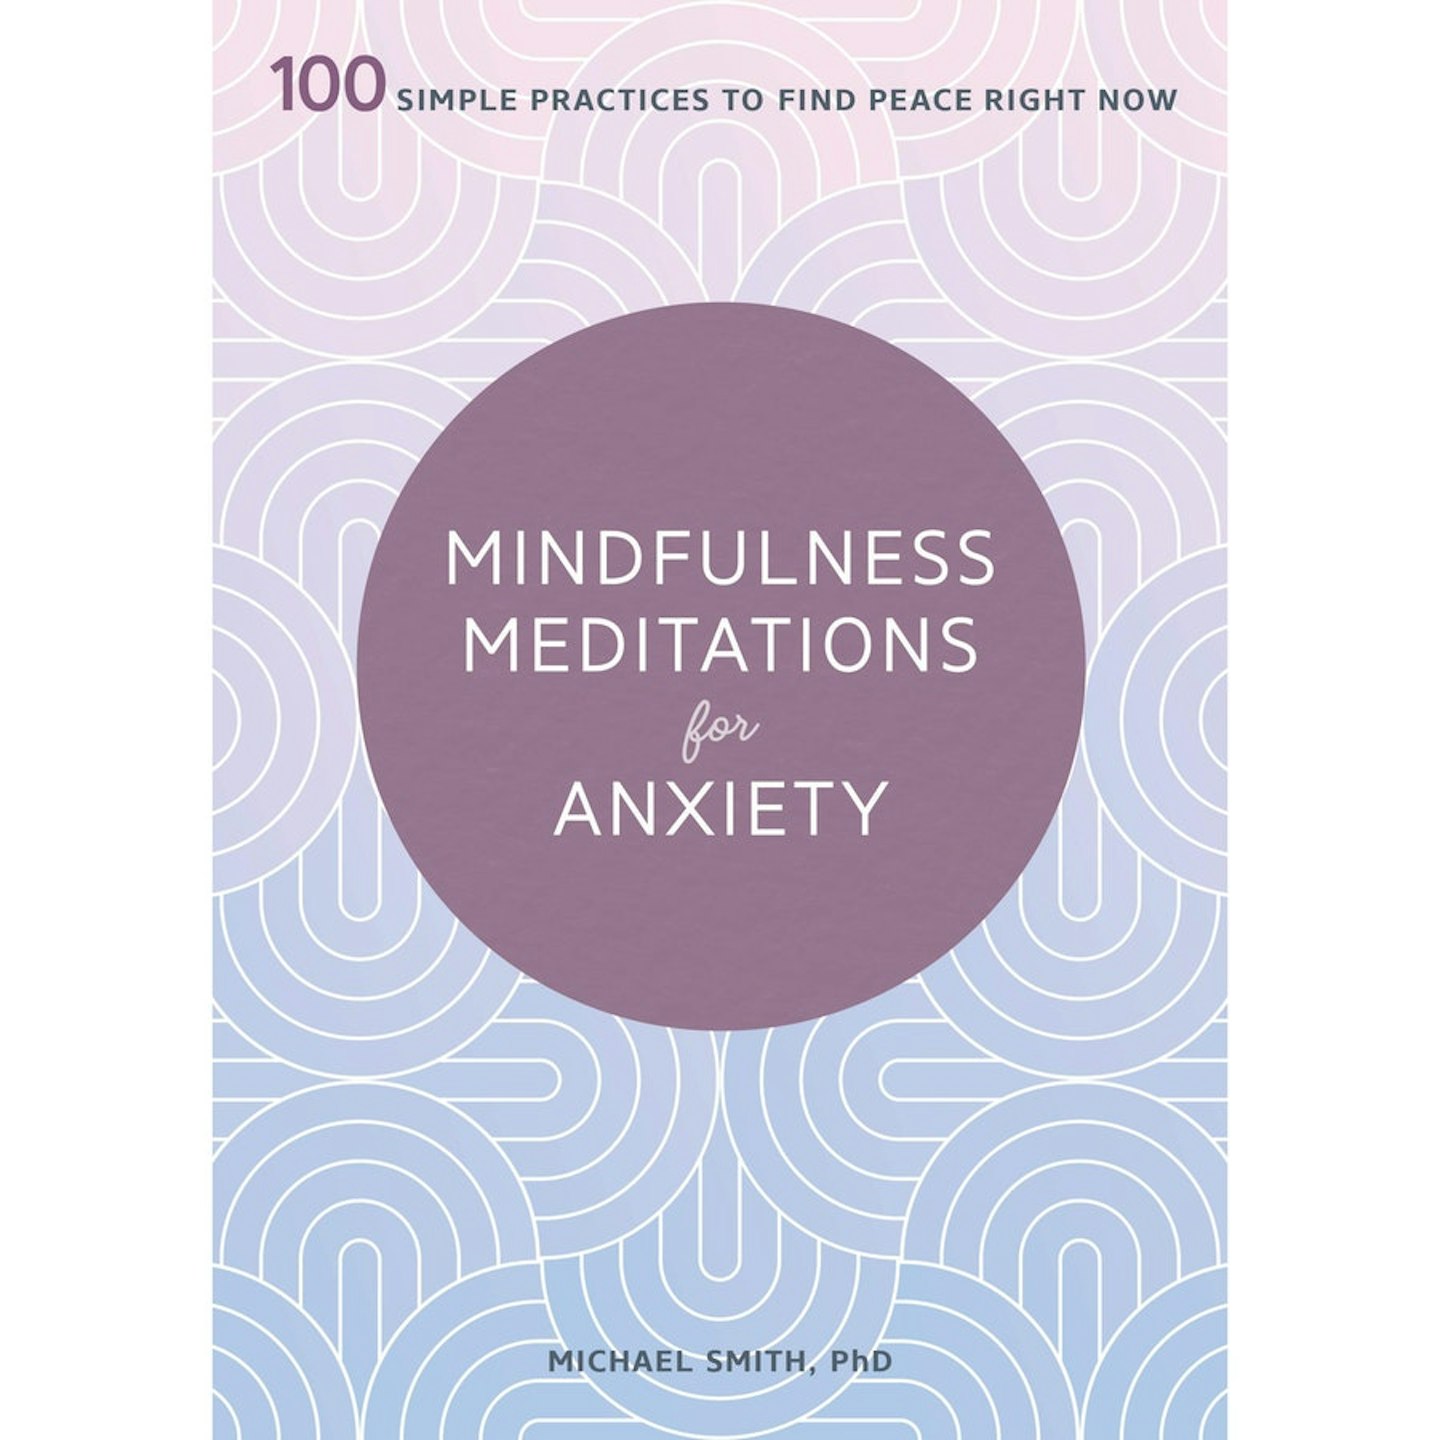 Mindfulness Meditations for Anxiety by Michael Smith PHD